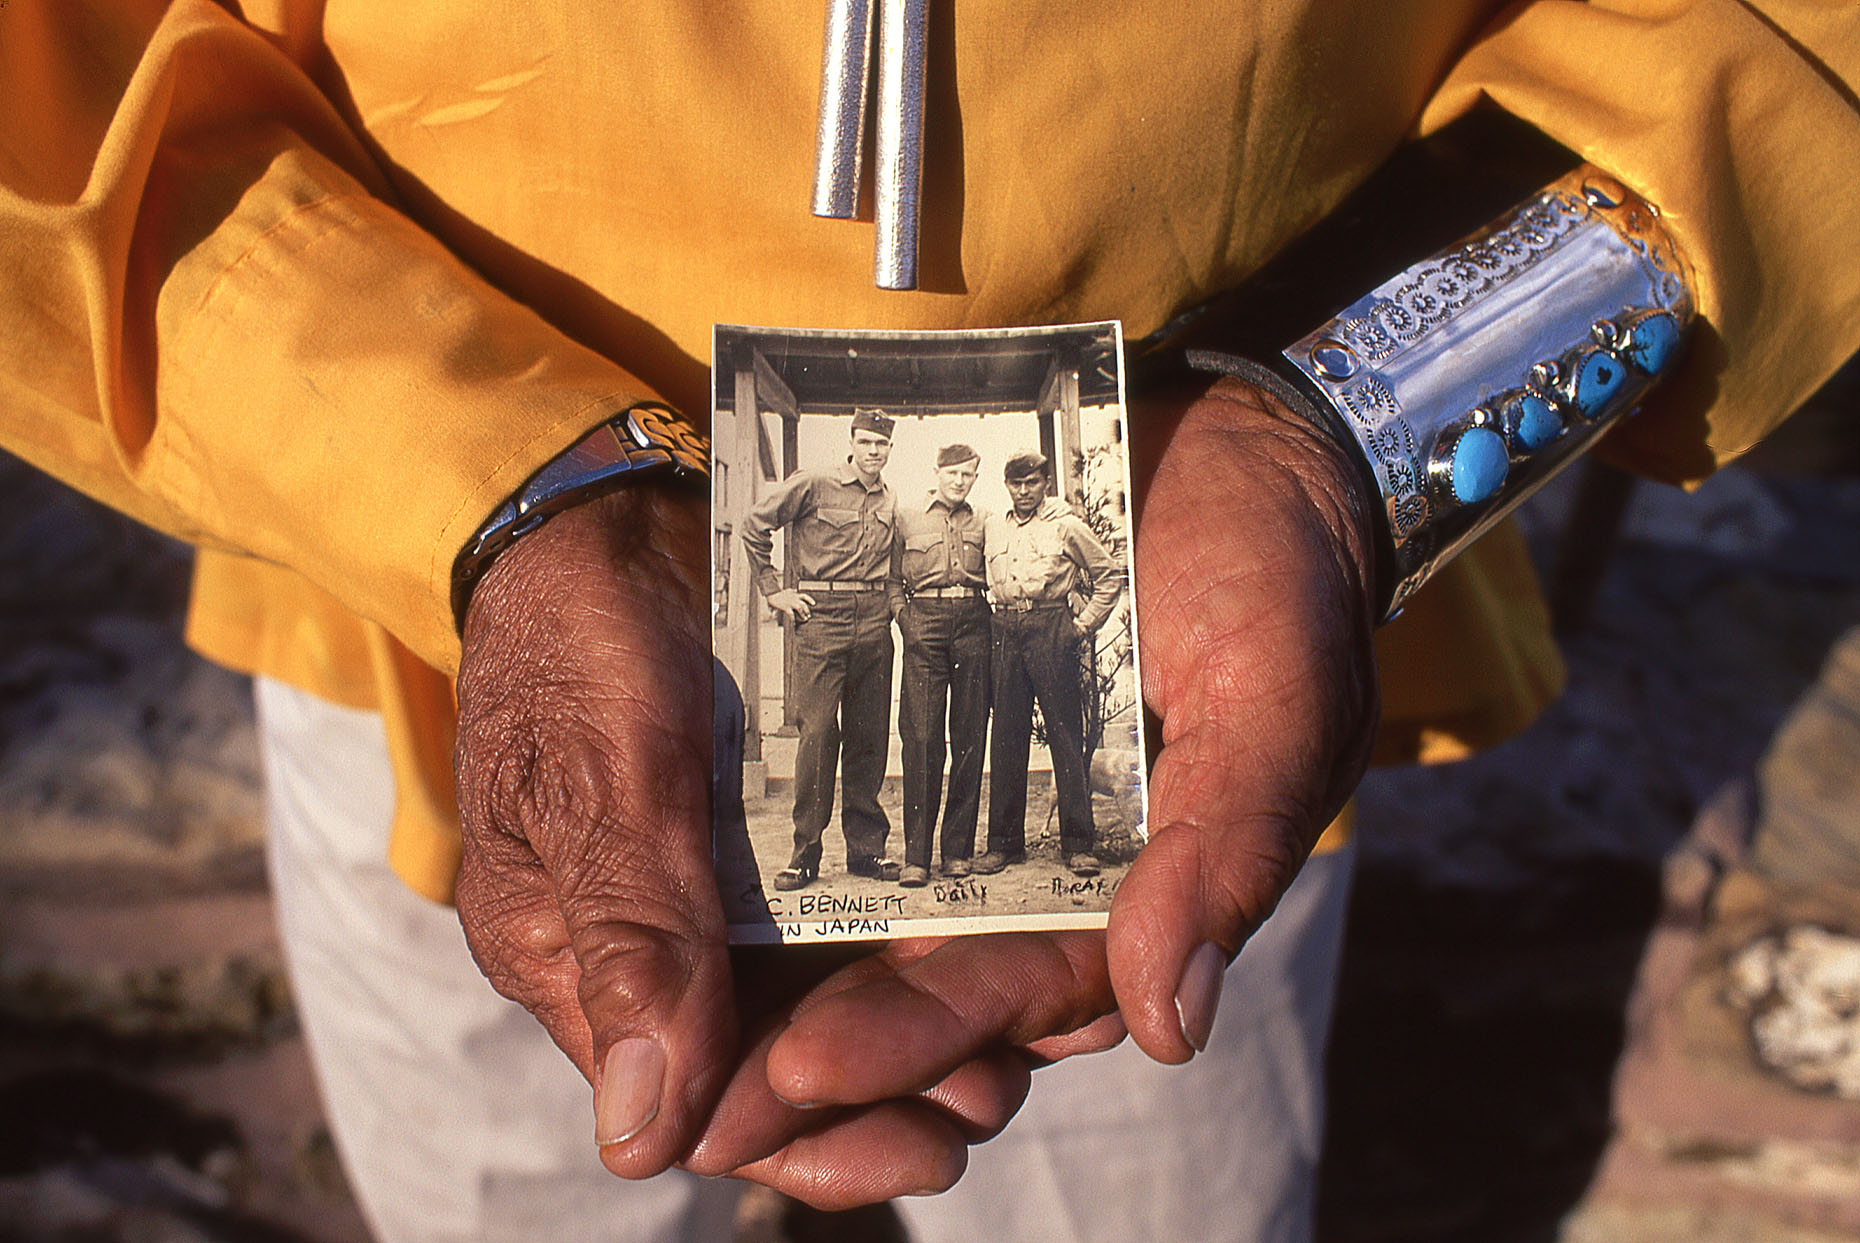 Navajo Code Talker Teddy Draper, Sr. John Annerino, Native American traditions, holds a World War II photo of himself and two buddies taken in Japan